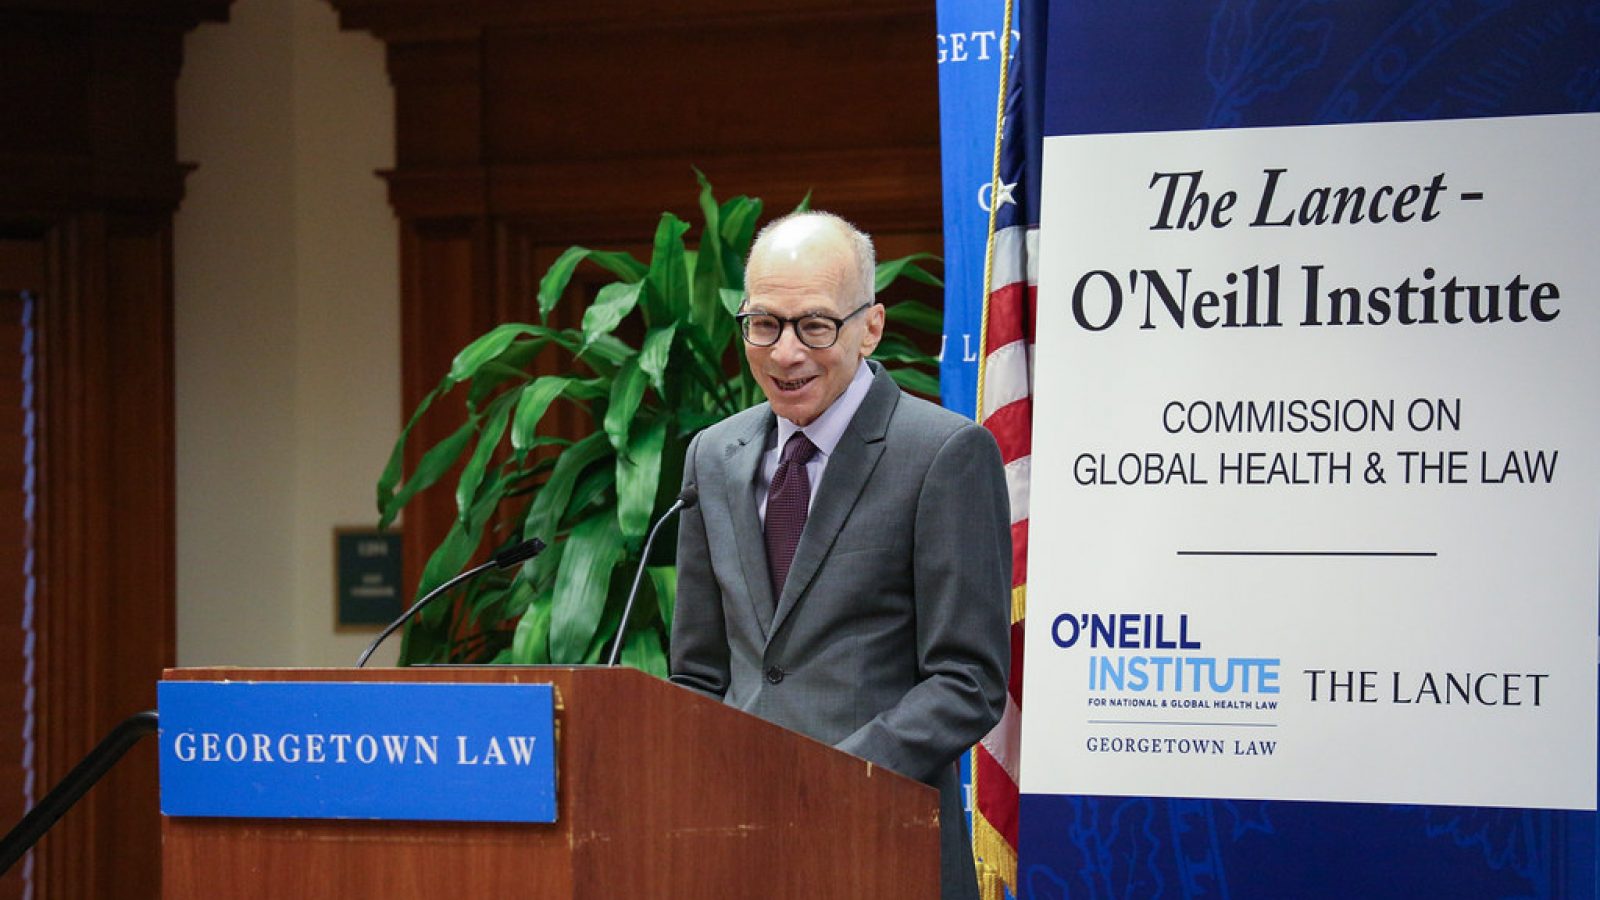 Professor Gostin Speaking at a Georgetown Law Event